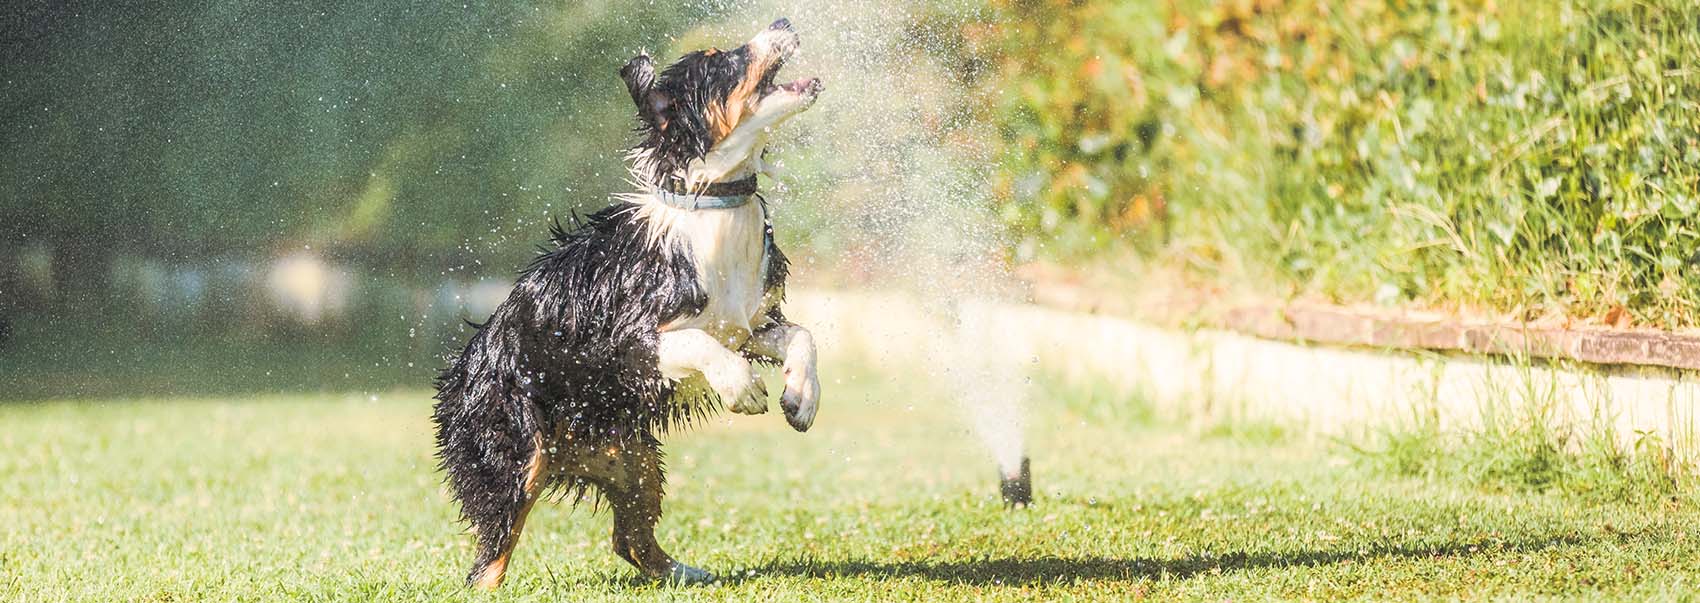 Fun in the Sun: 10 Awesome Games to Play with Your Dog This Summer, Ten  West Bird and Animal Hospital